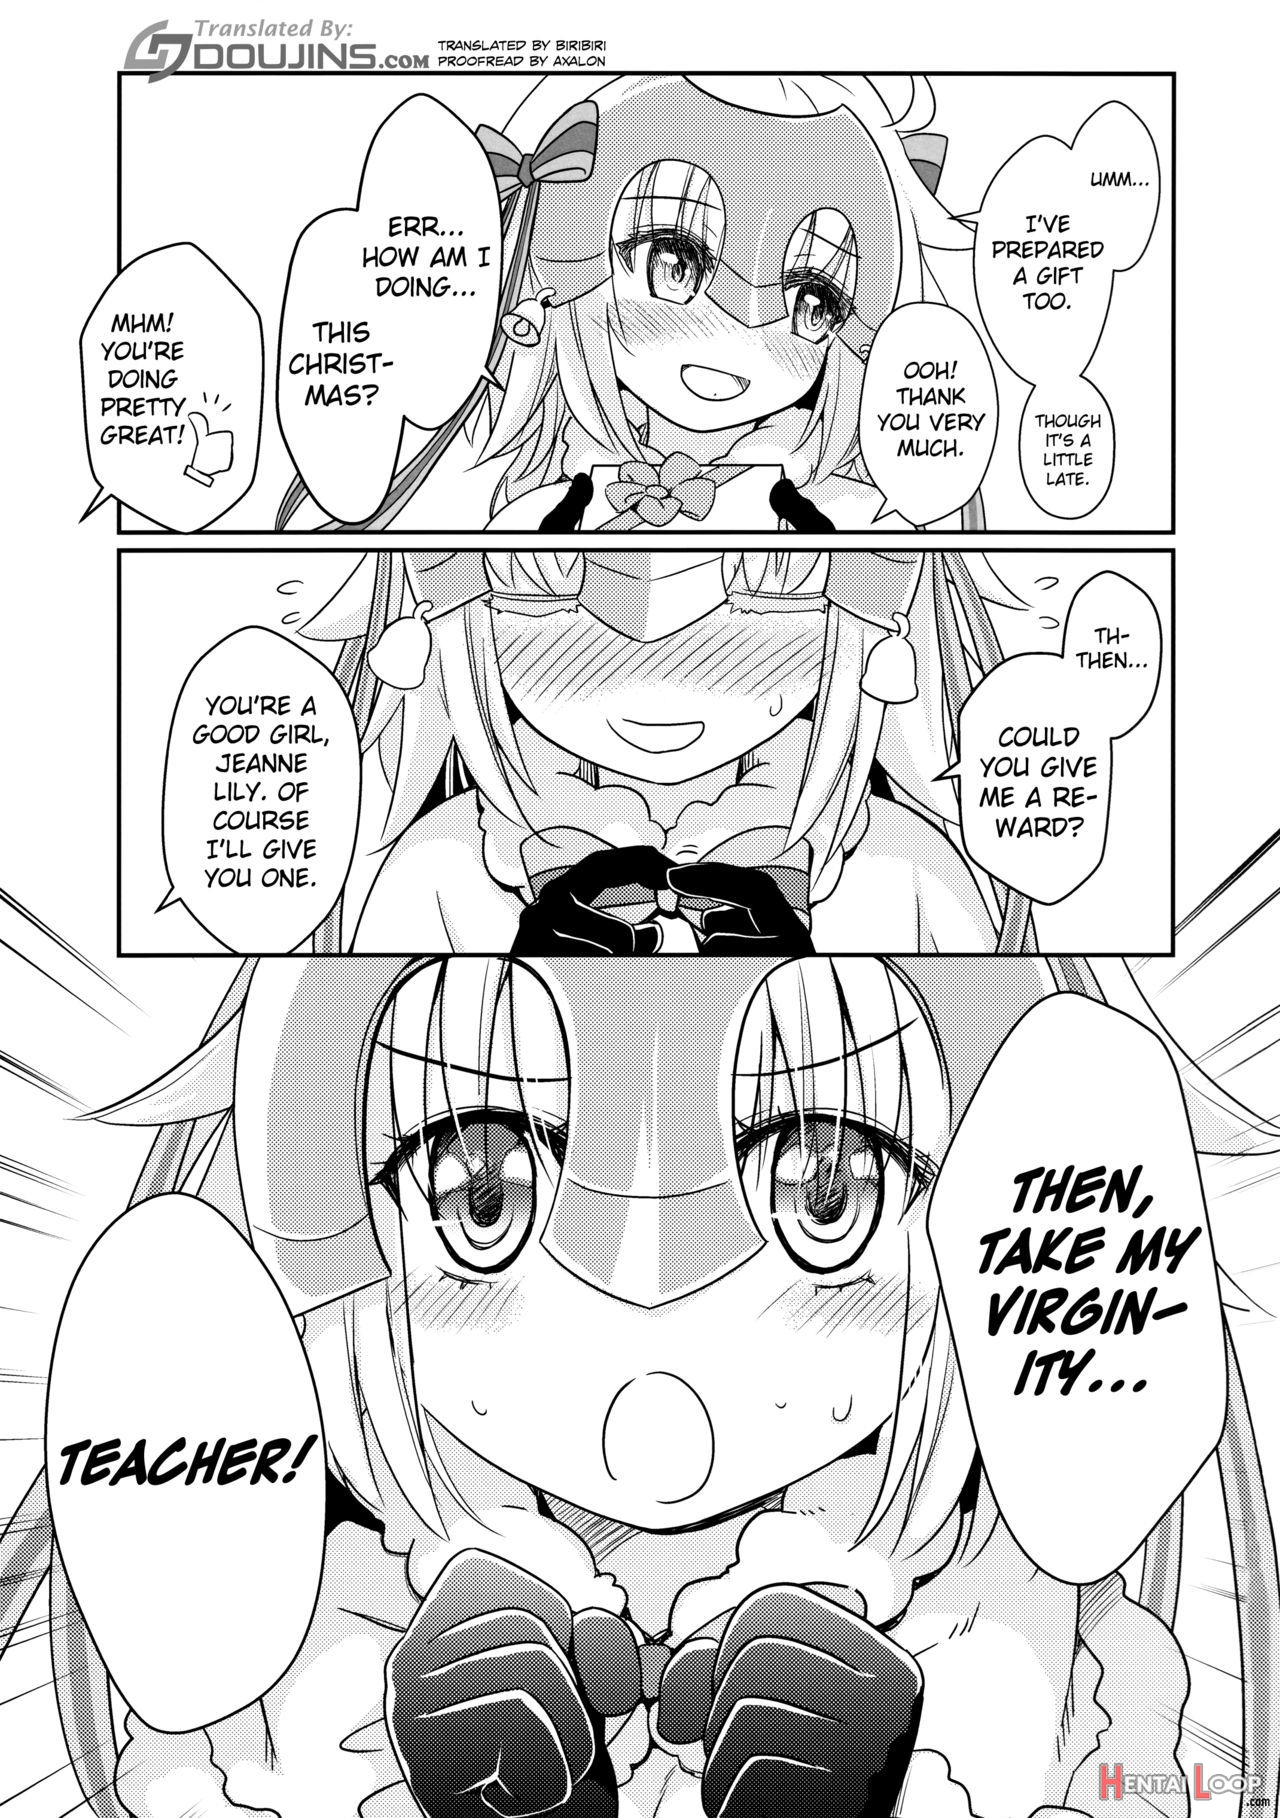 Jeanne Lily Is A Good Girl? page 2